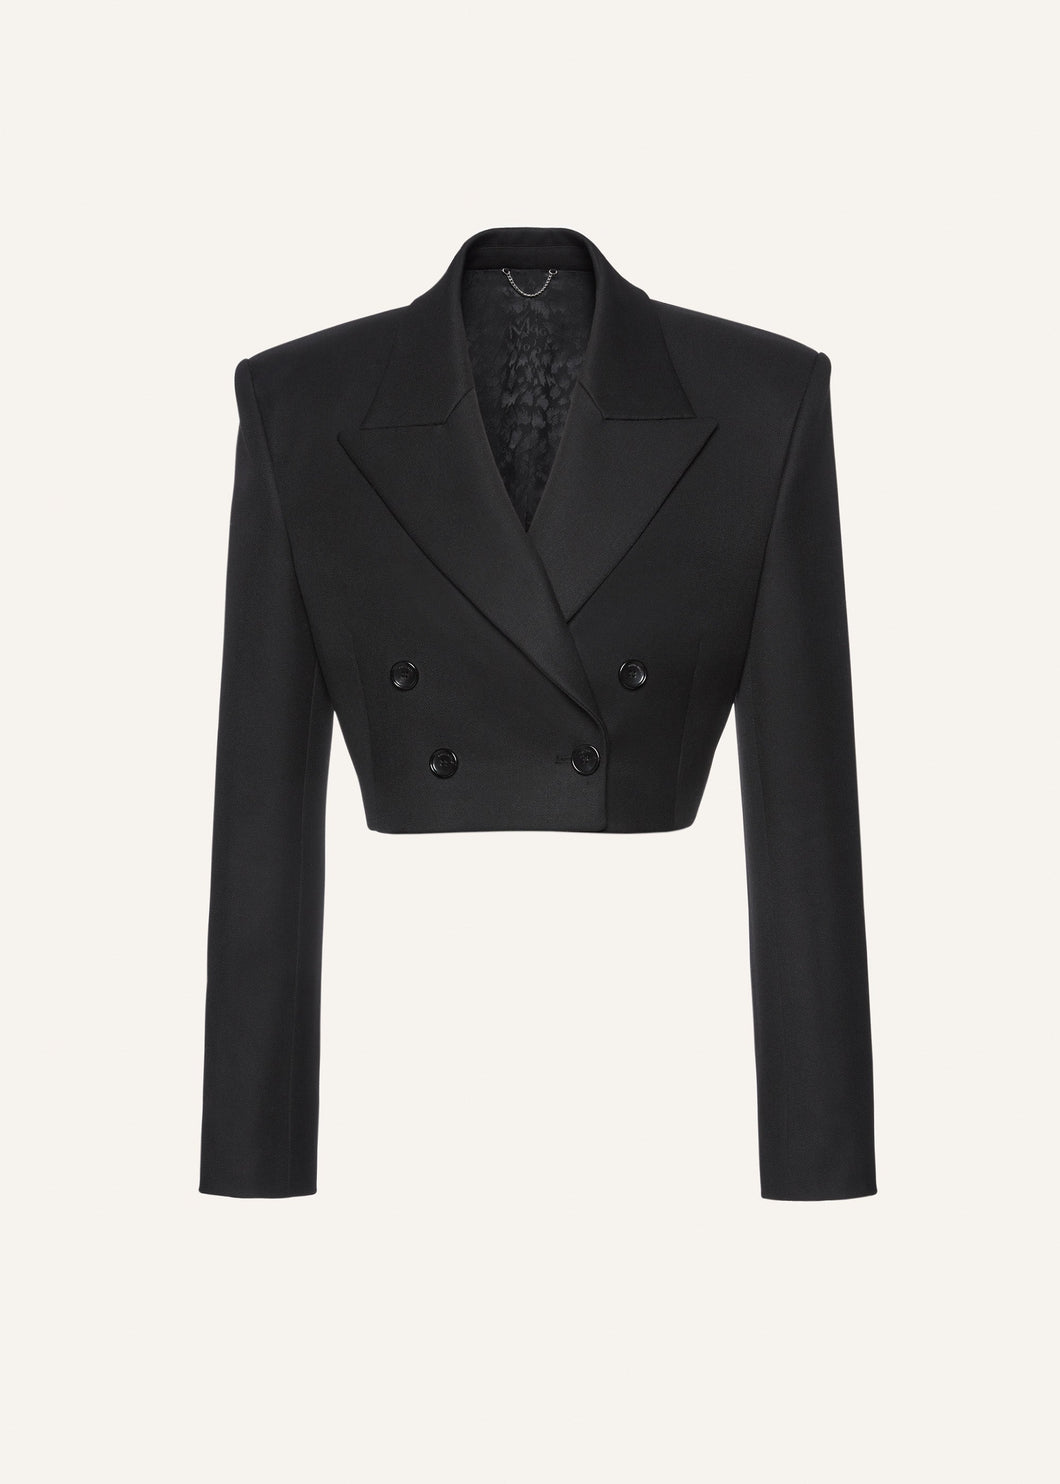 Cropped double breasted blazer in black